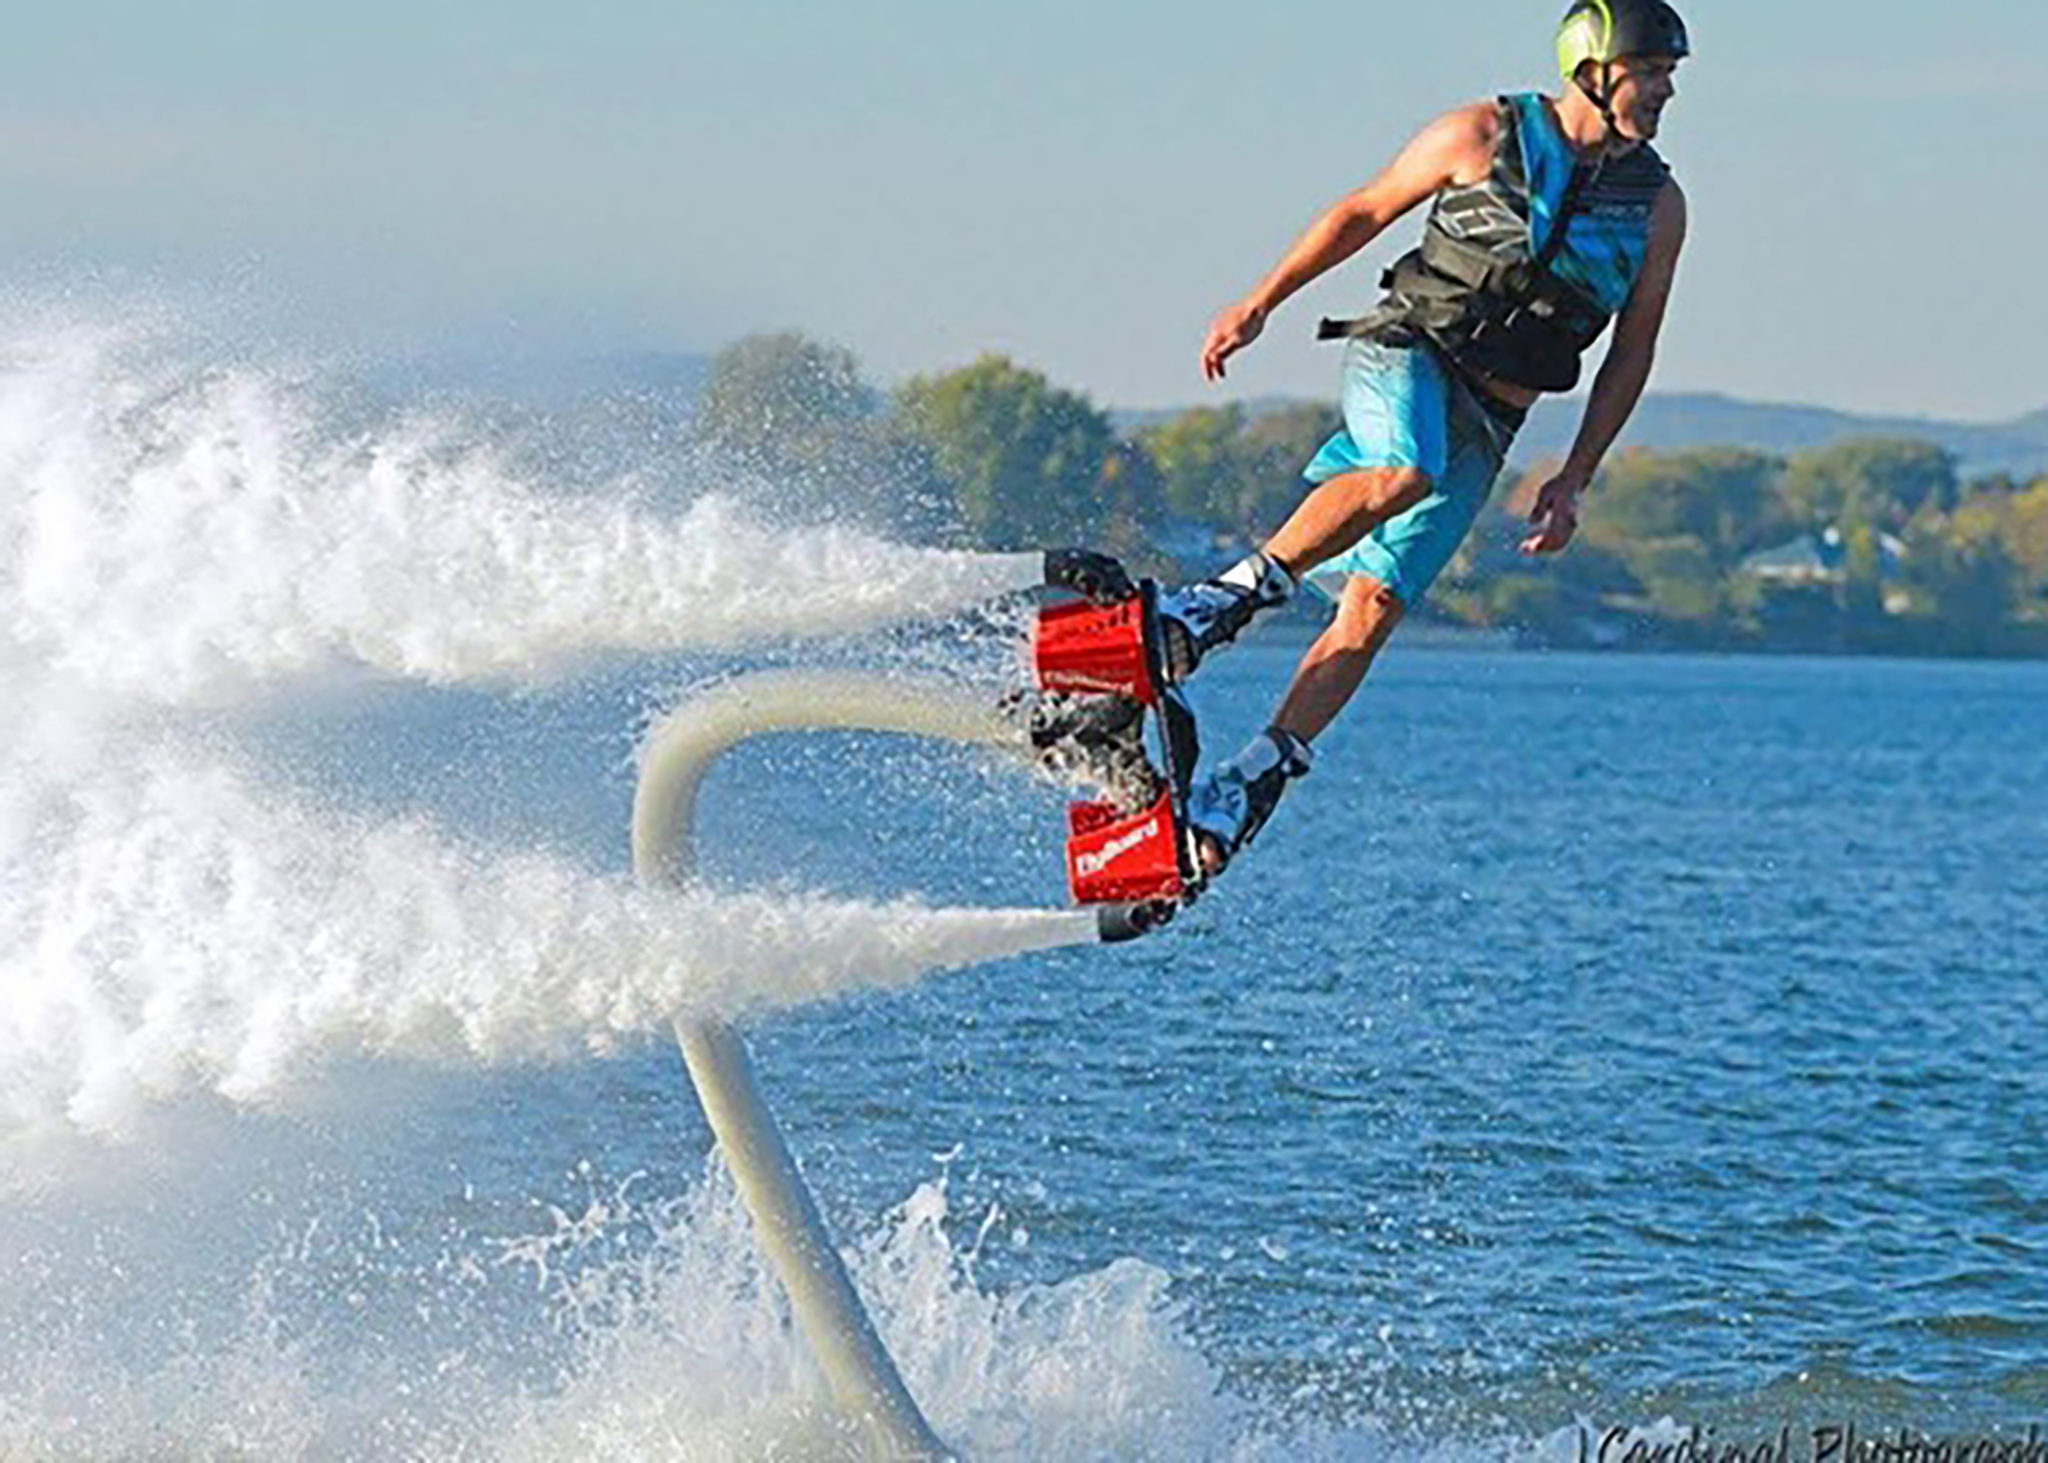 Someone at Austin Flyboard